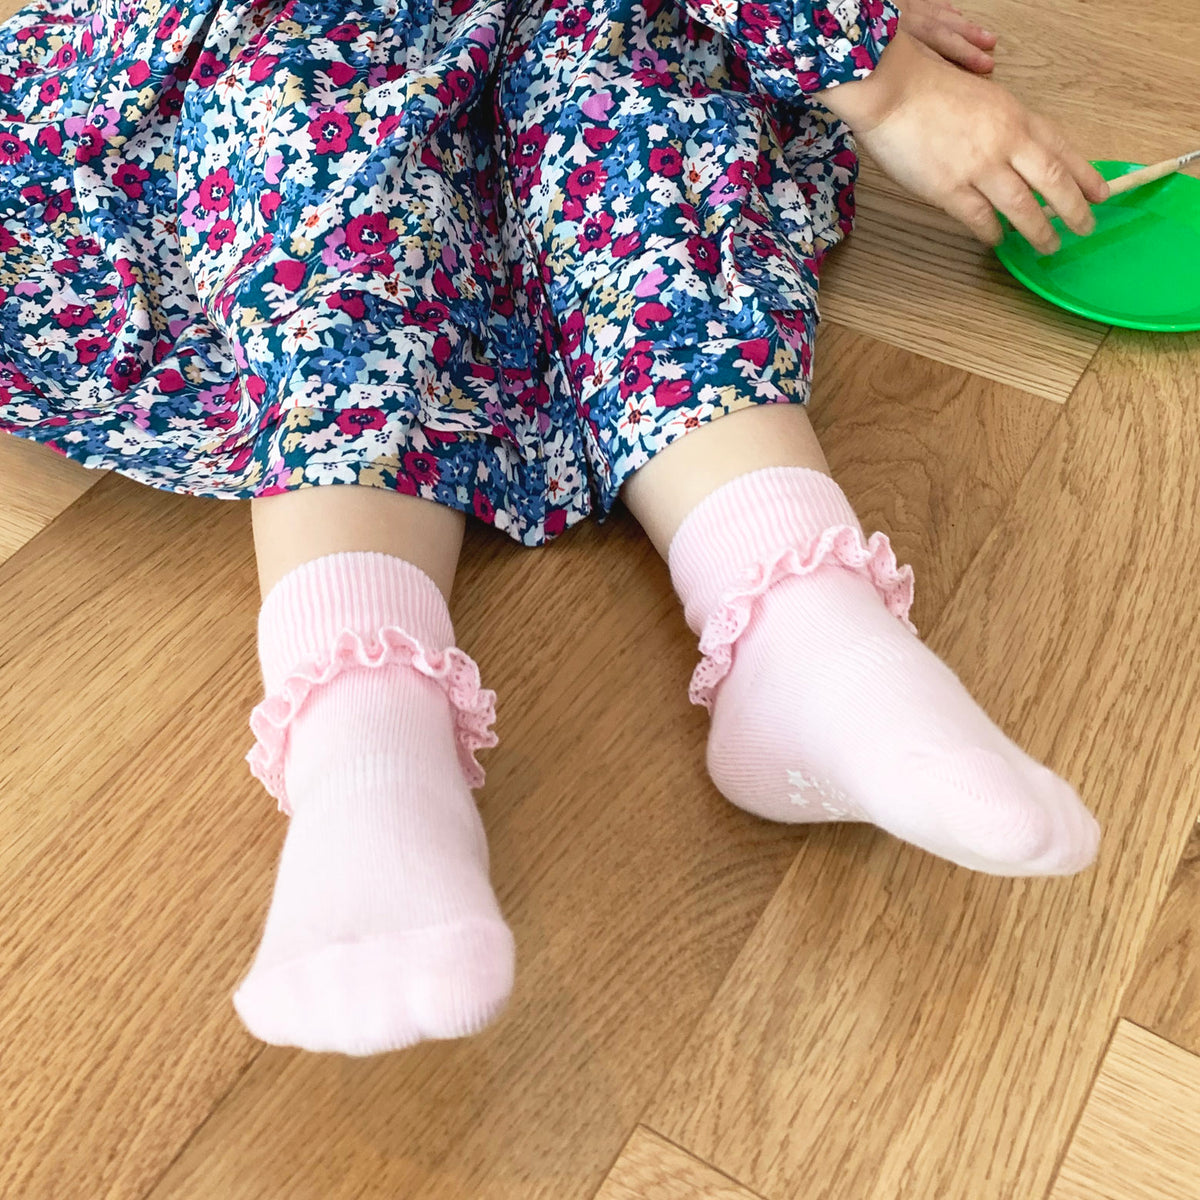 Frilly Non-Slip Stay-On Baby and Toddler Socks - Pink Lemonade